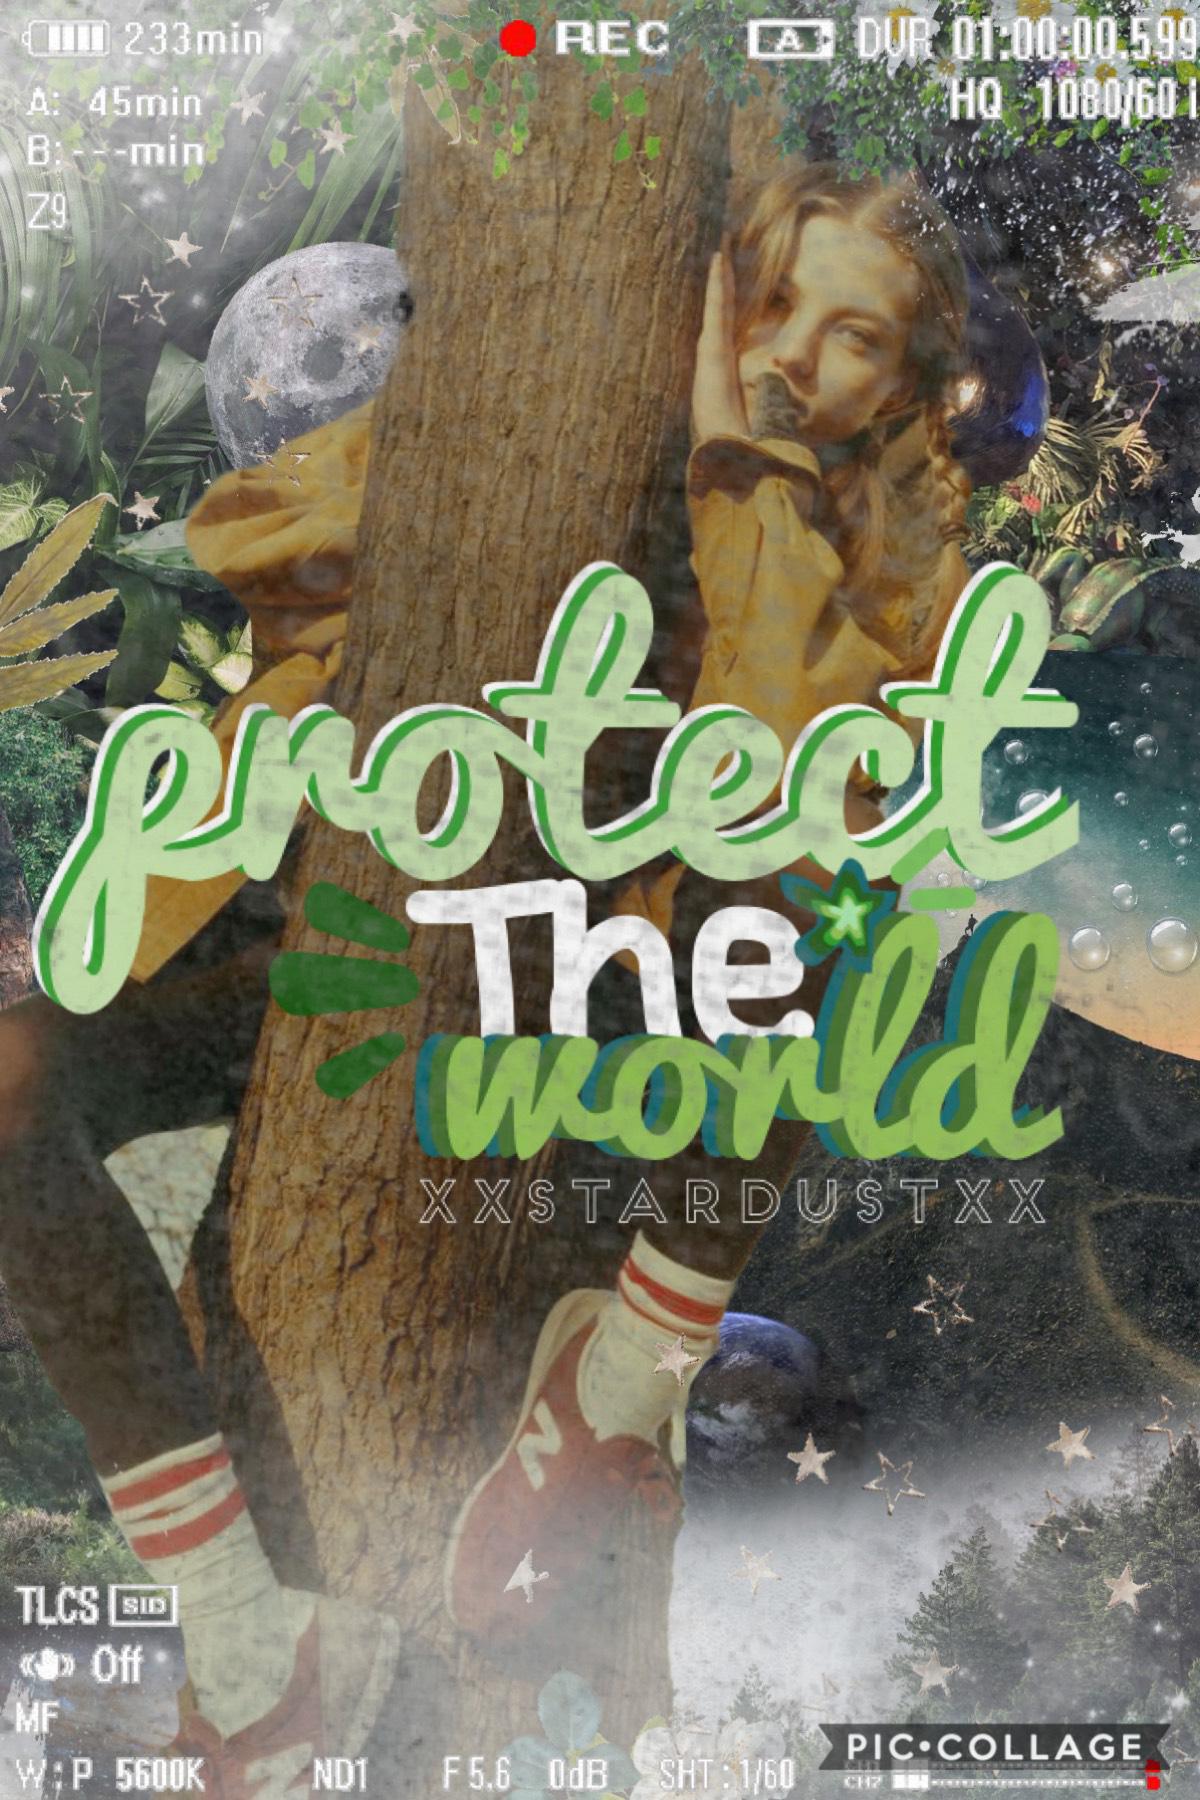 Tap
Sort of inspired by positive vibes I found the pick and tried something different a saw she had a post with the same pick. 
#protecttheworld